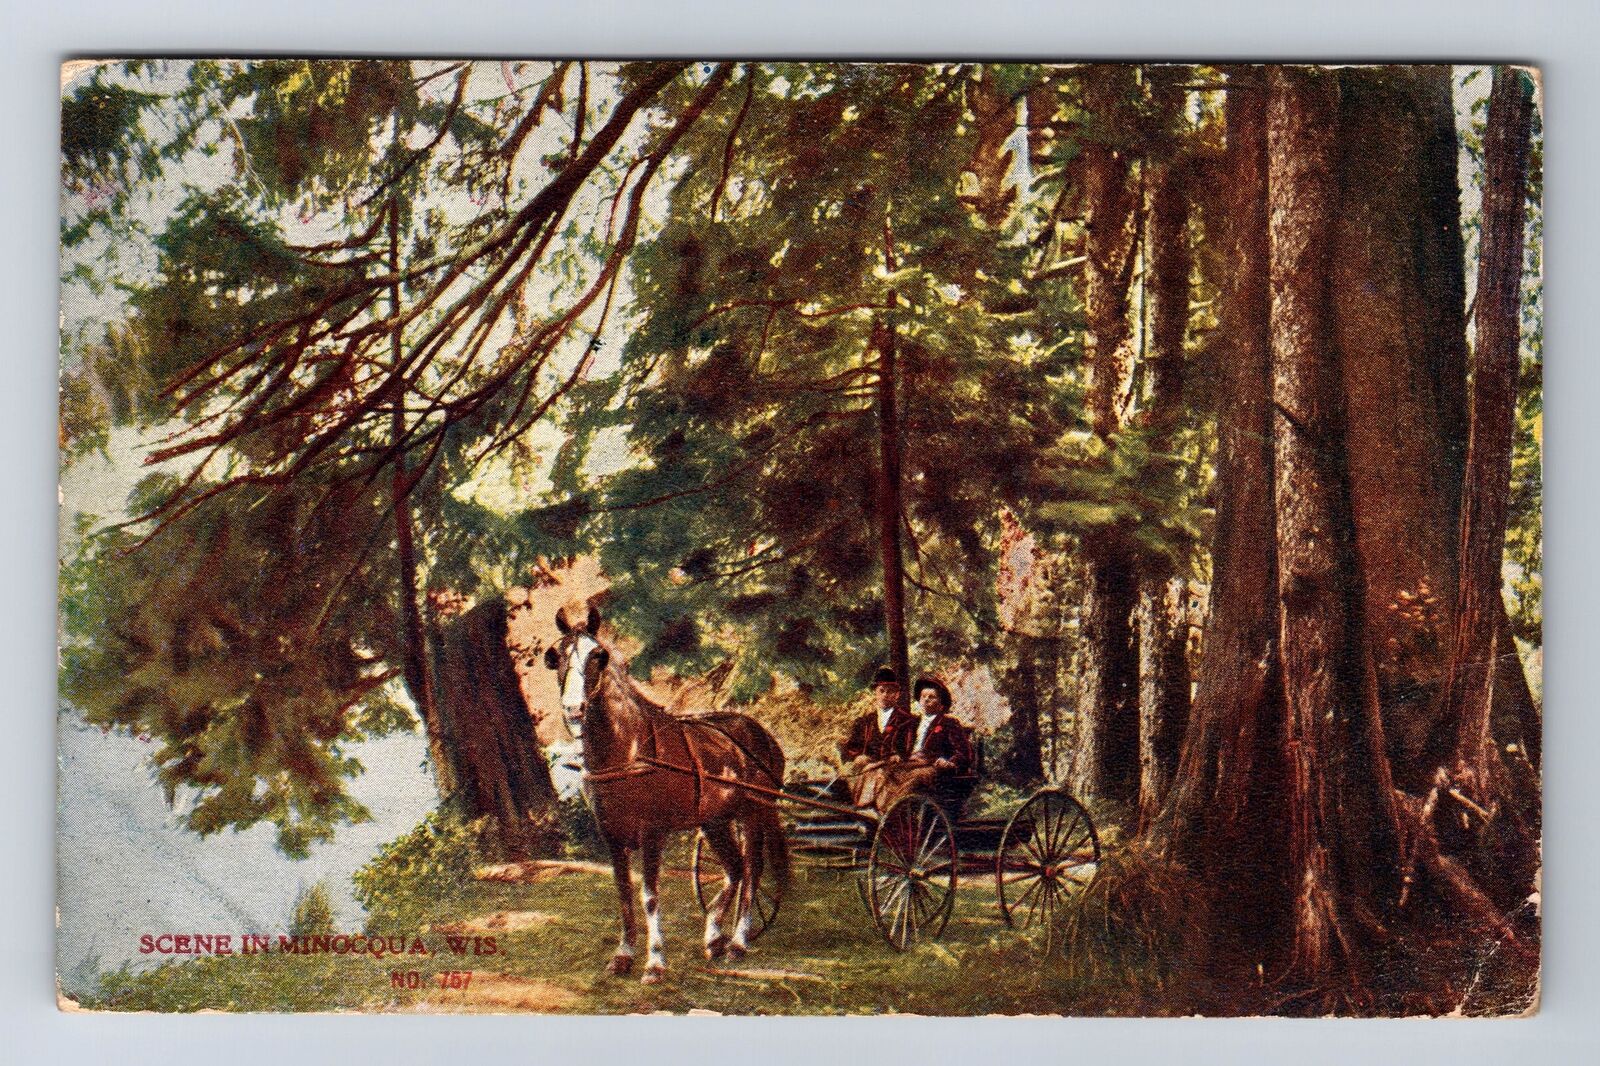 Minocqua WI-Wisconsin, Scene Of Horse And Carriage, Vintage c1916 Postcard